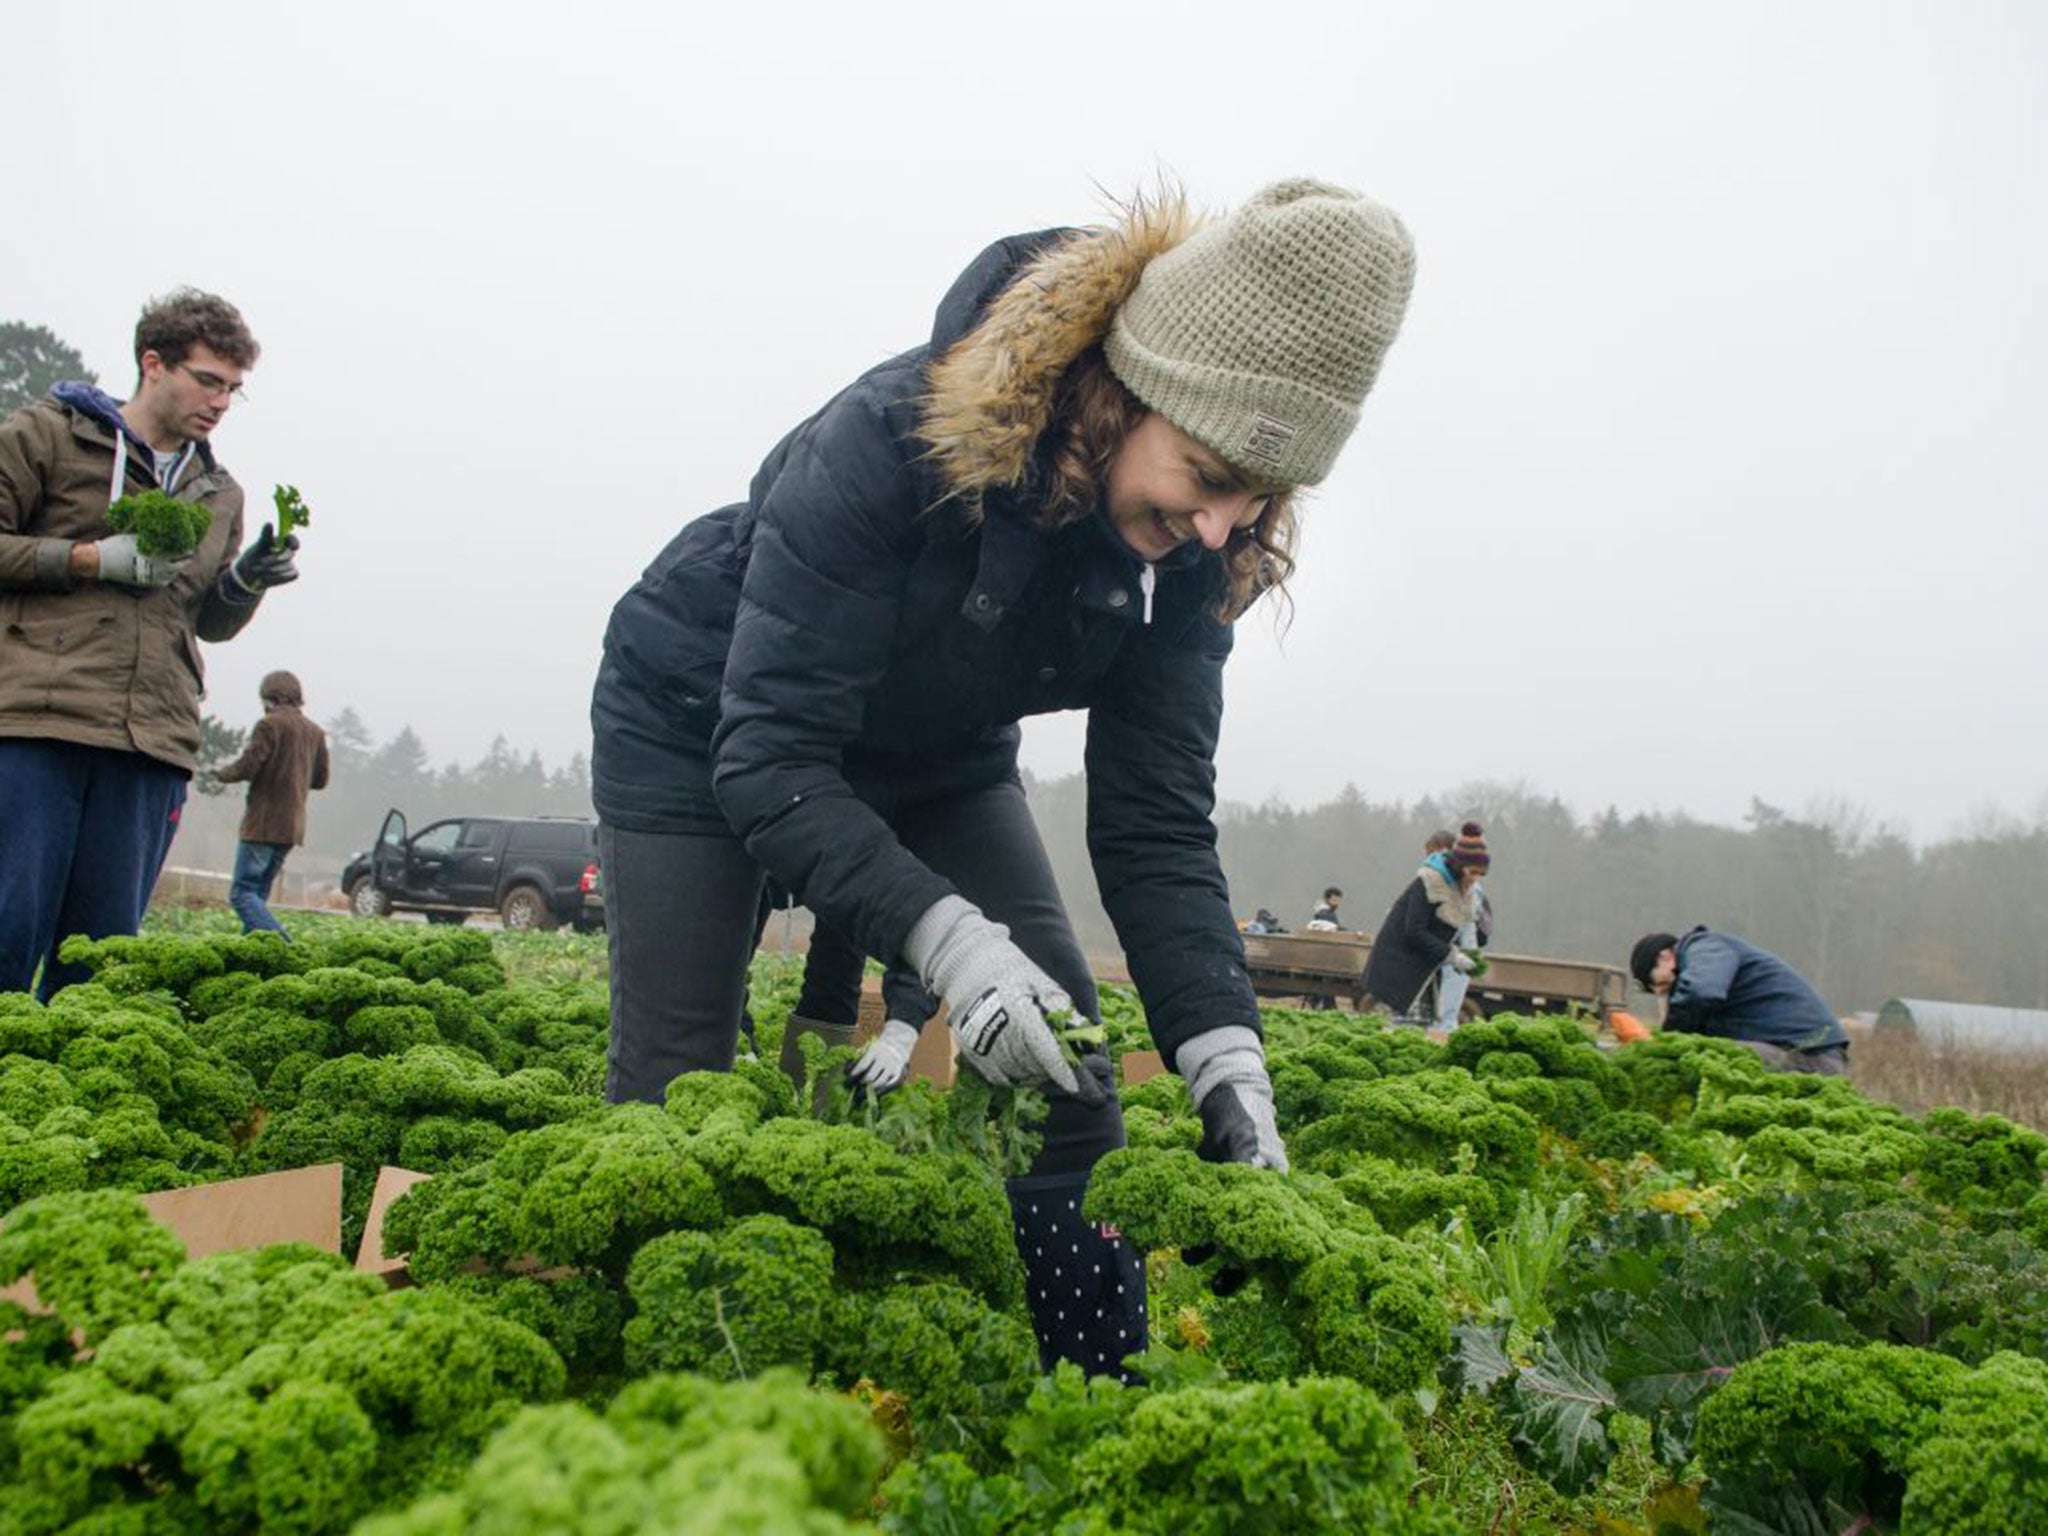 The writer joins volunteer gleaners on a farm in Norfolk, managed by Joe Rolfe